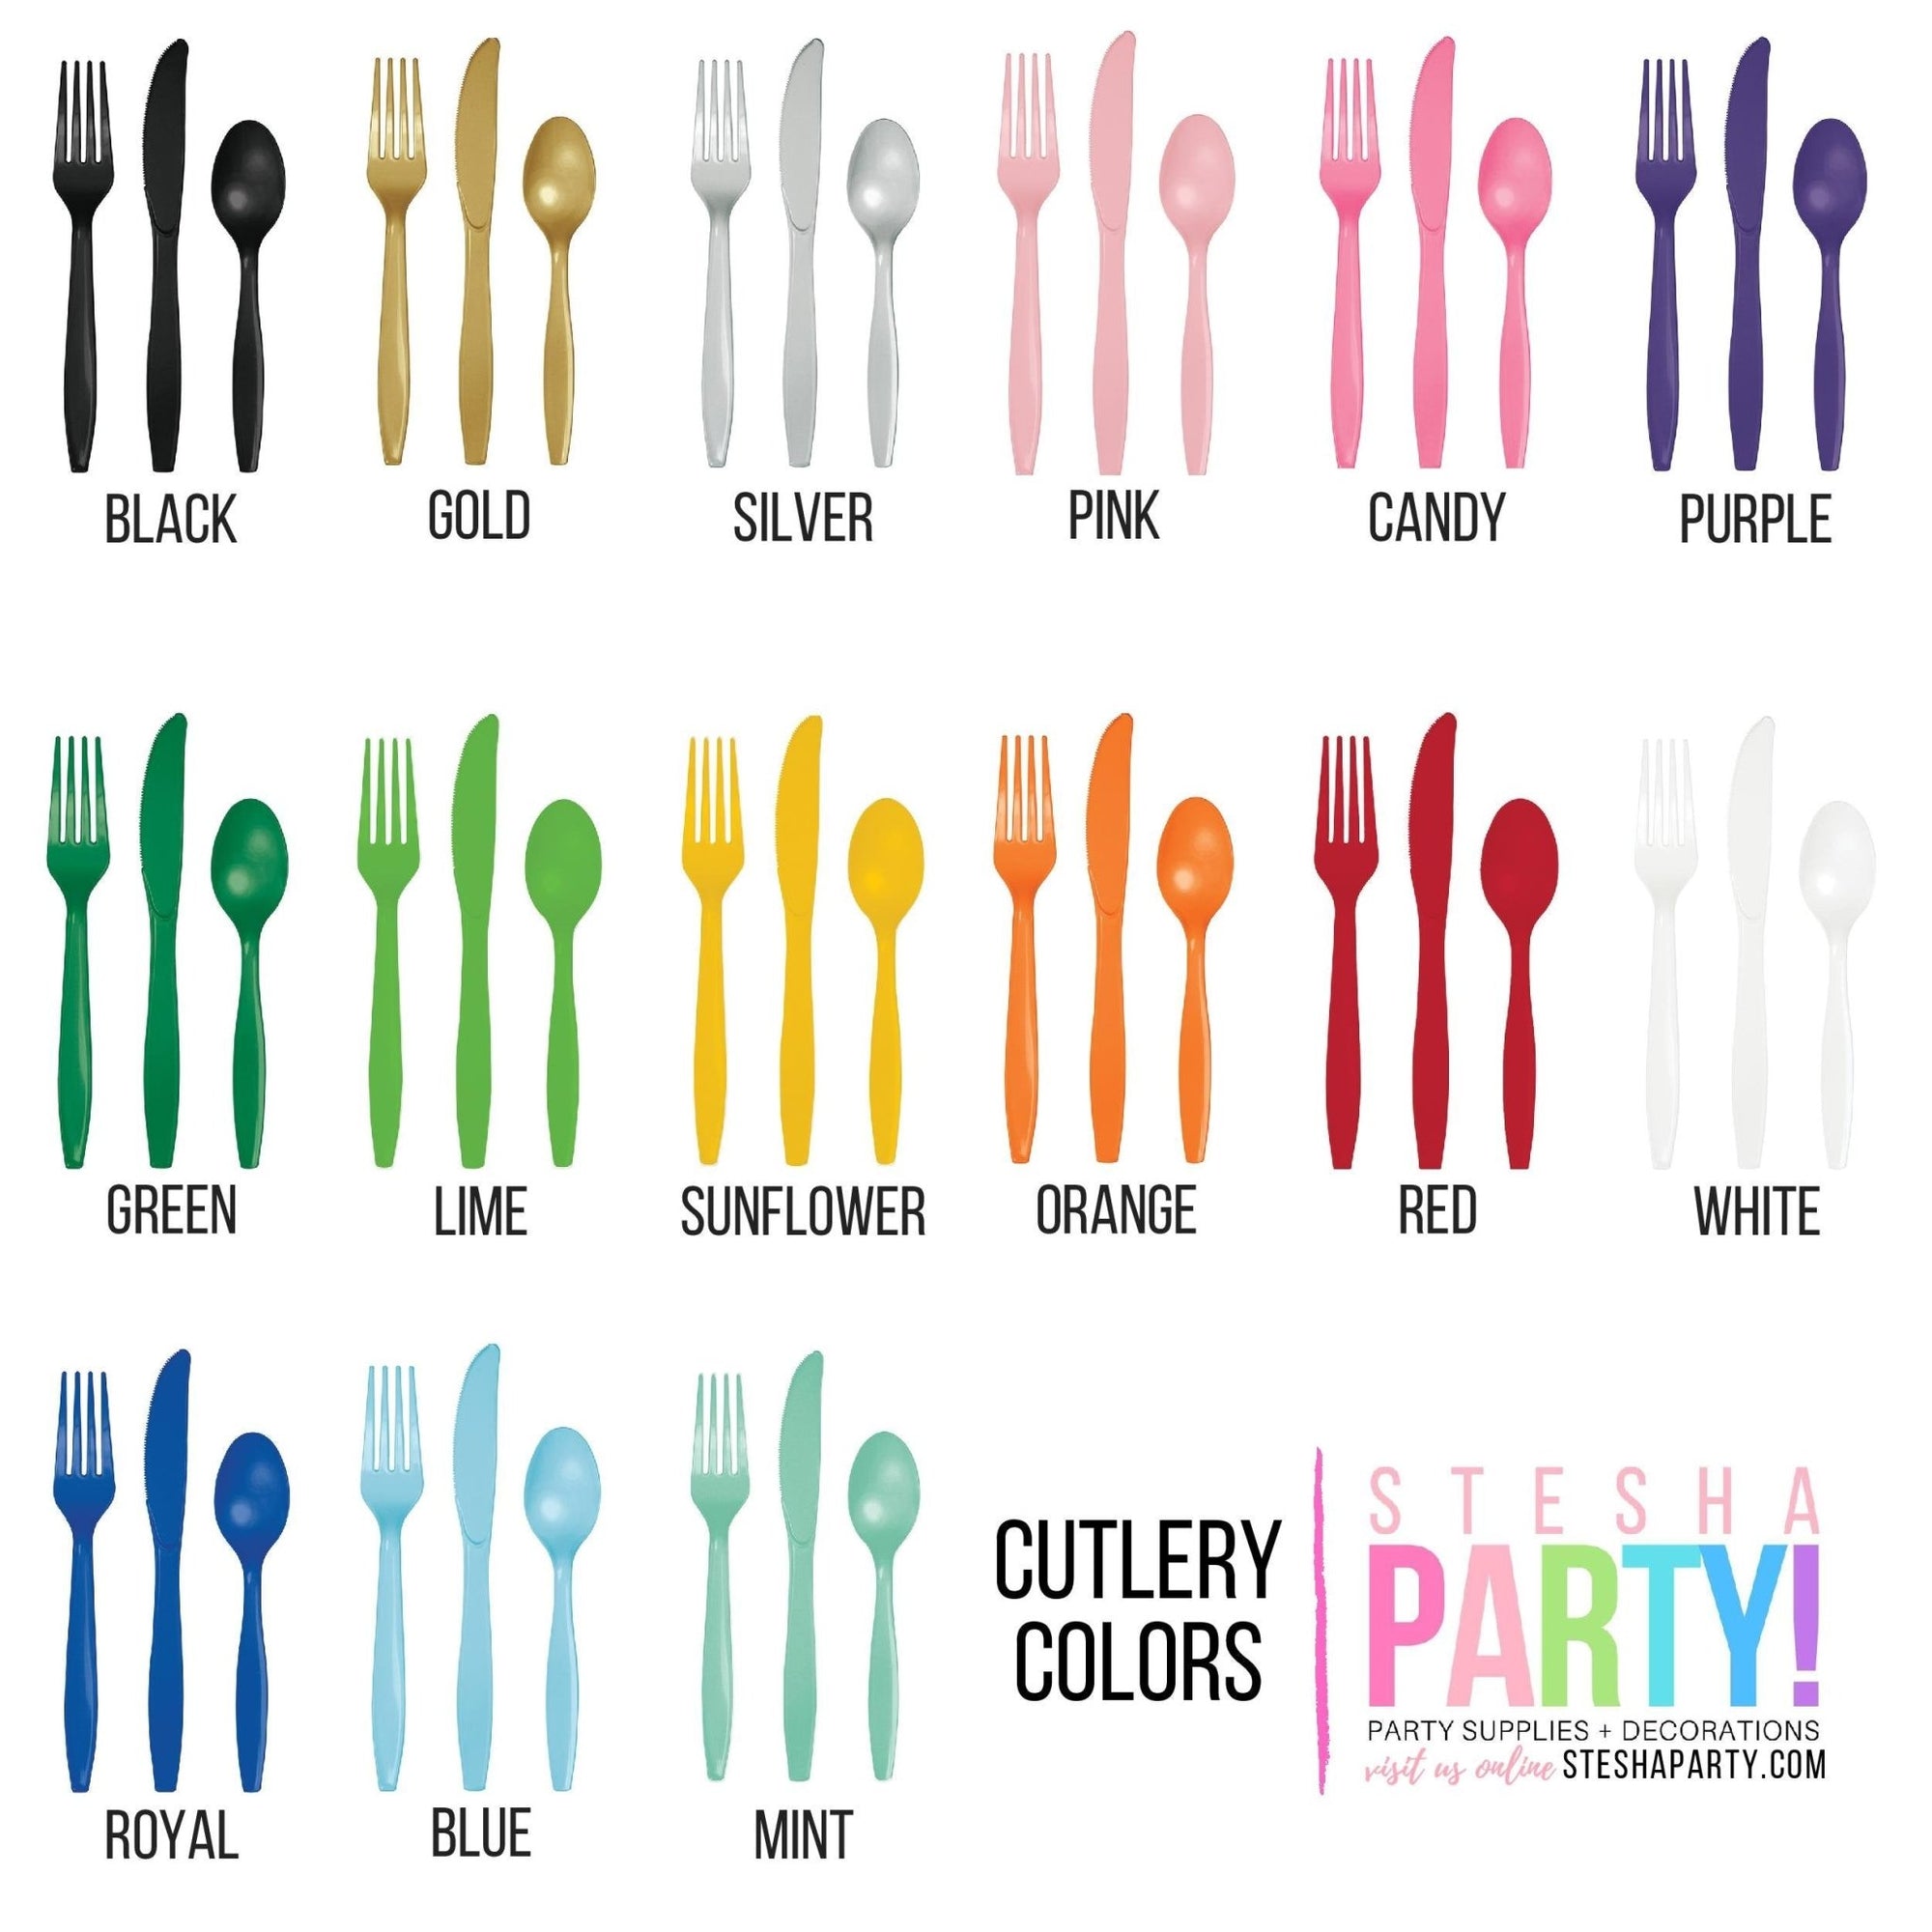 24-Set Gold Cutlery - Stesha Party